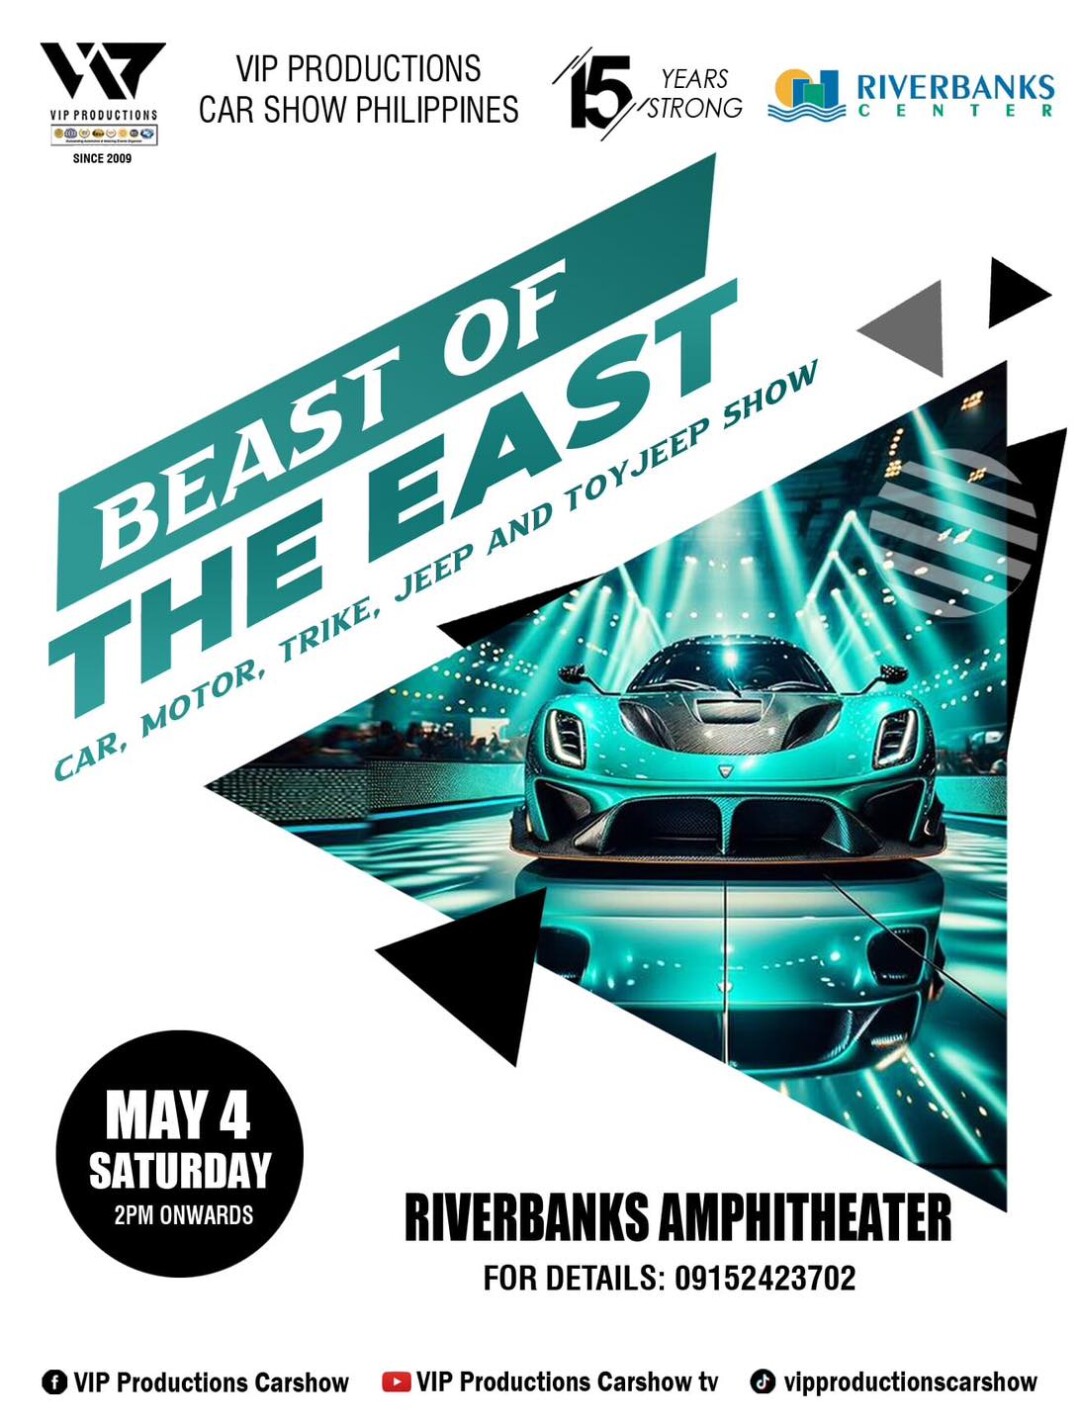 BEATS OF THE EAST CAR, MOTOR, TRIKE, JEEP AND TOY JEEP SHOW